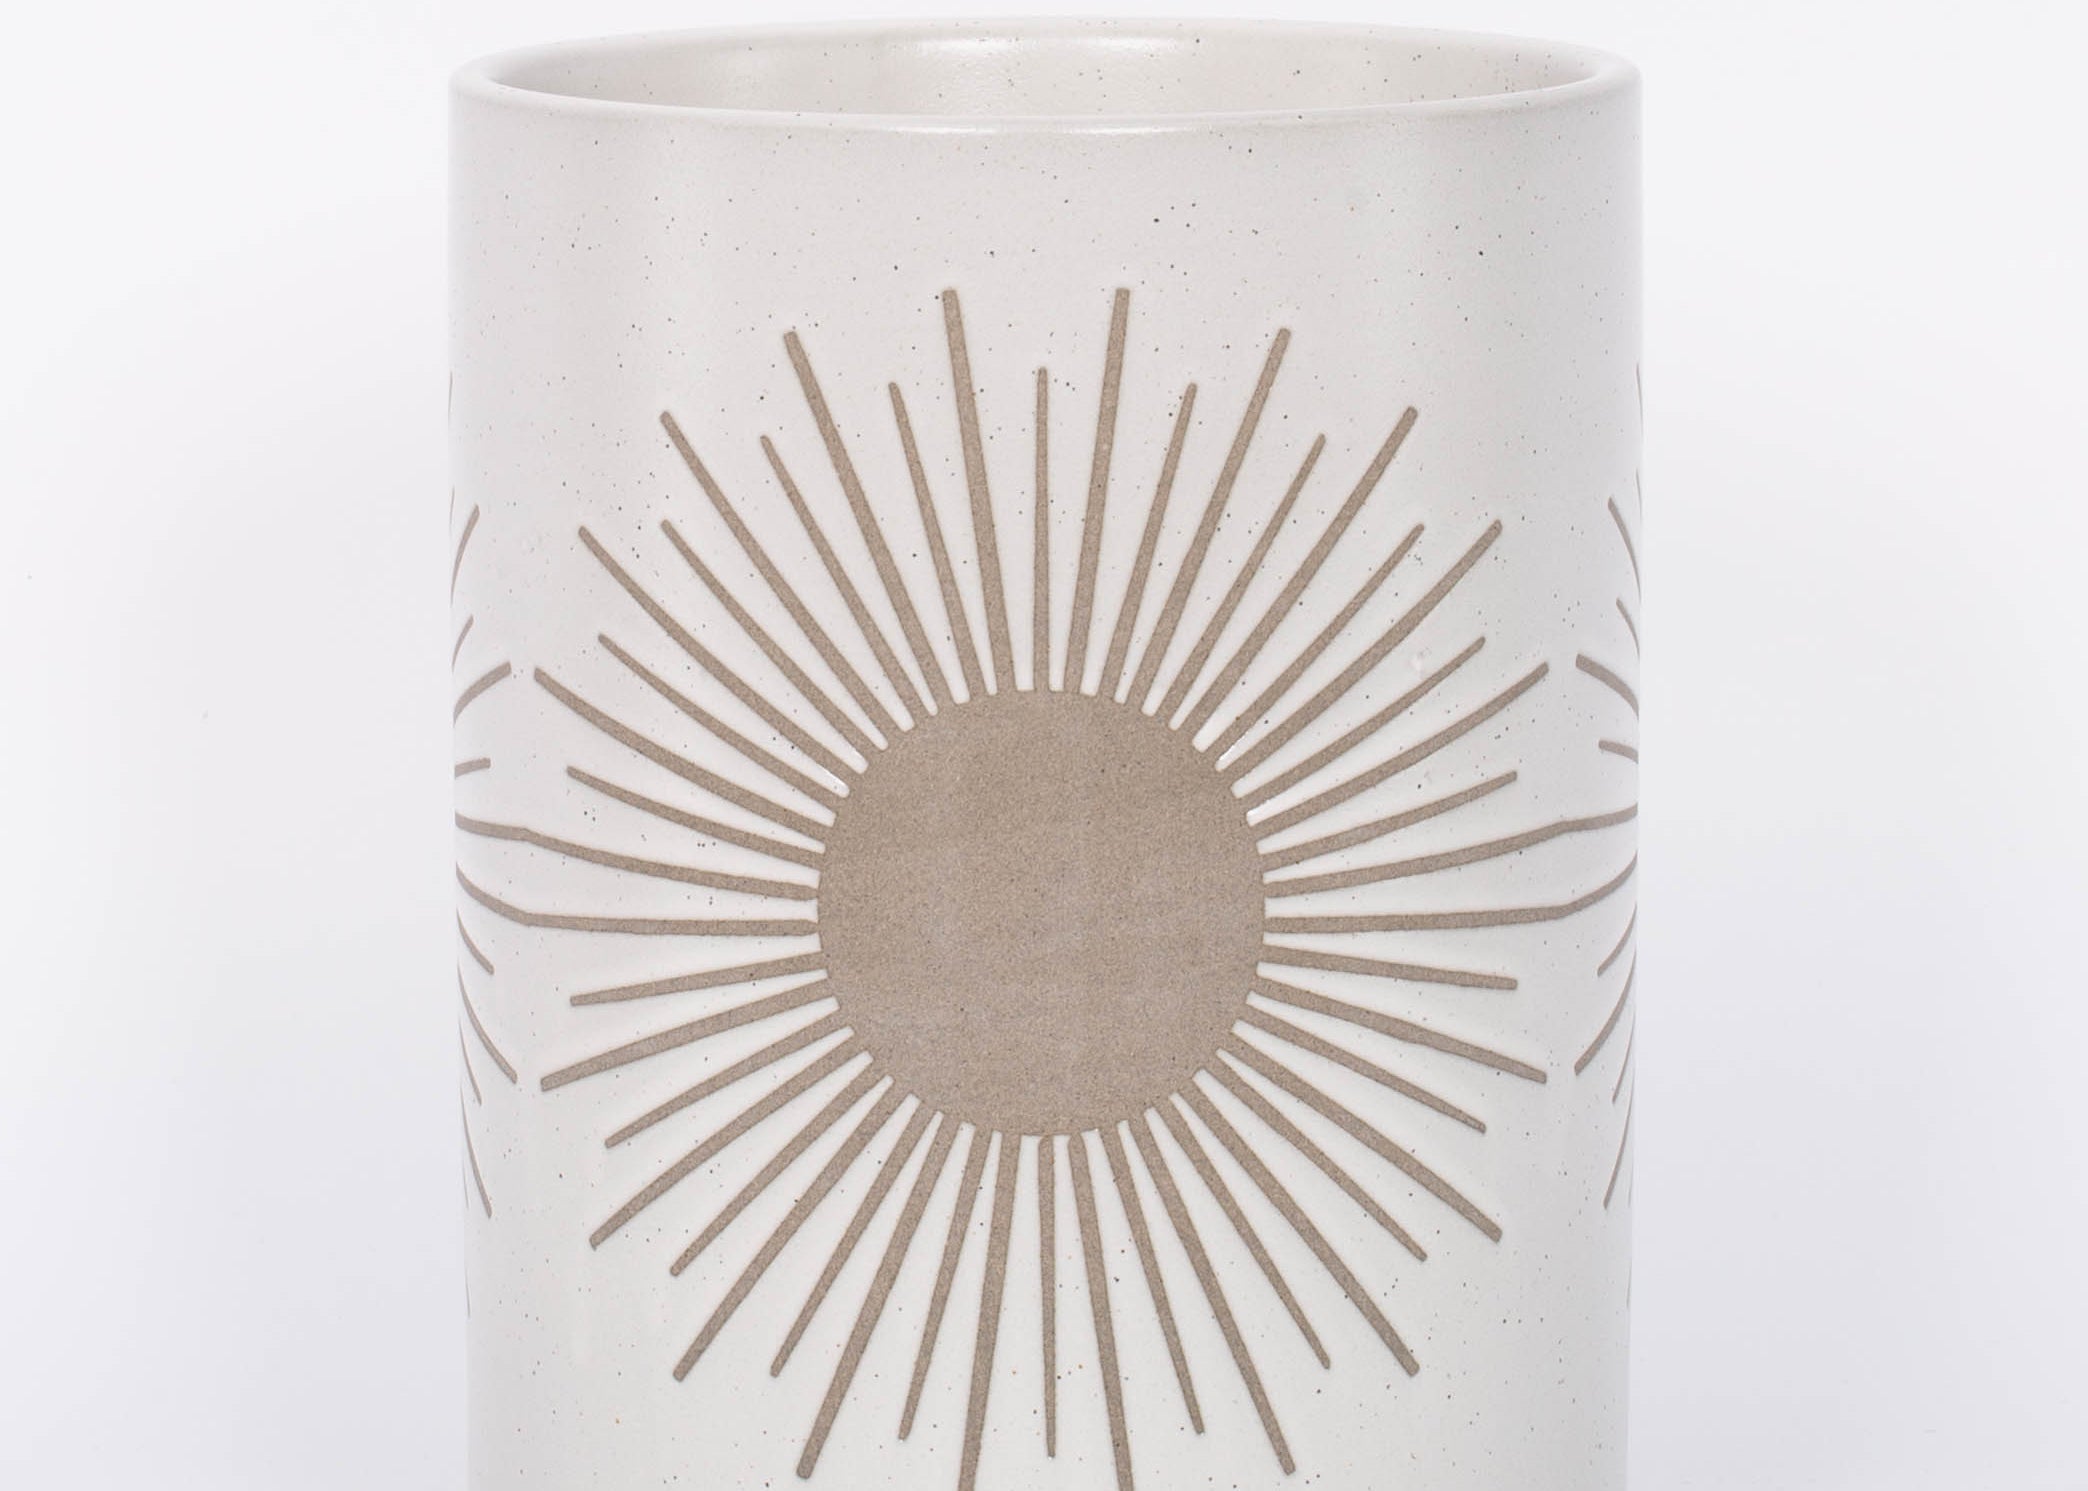 Large Sunrise to Sunset planter Pot by Citrine with golden sun design on natural white. 